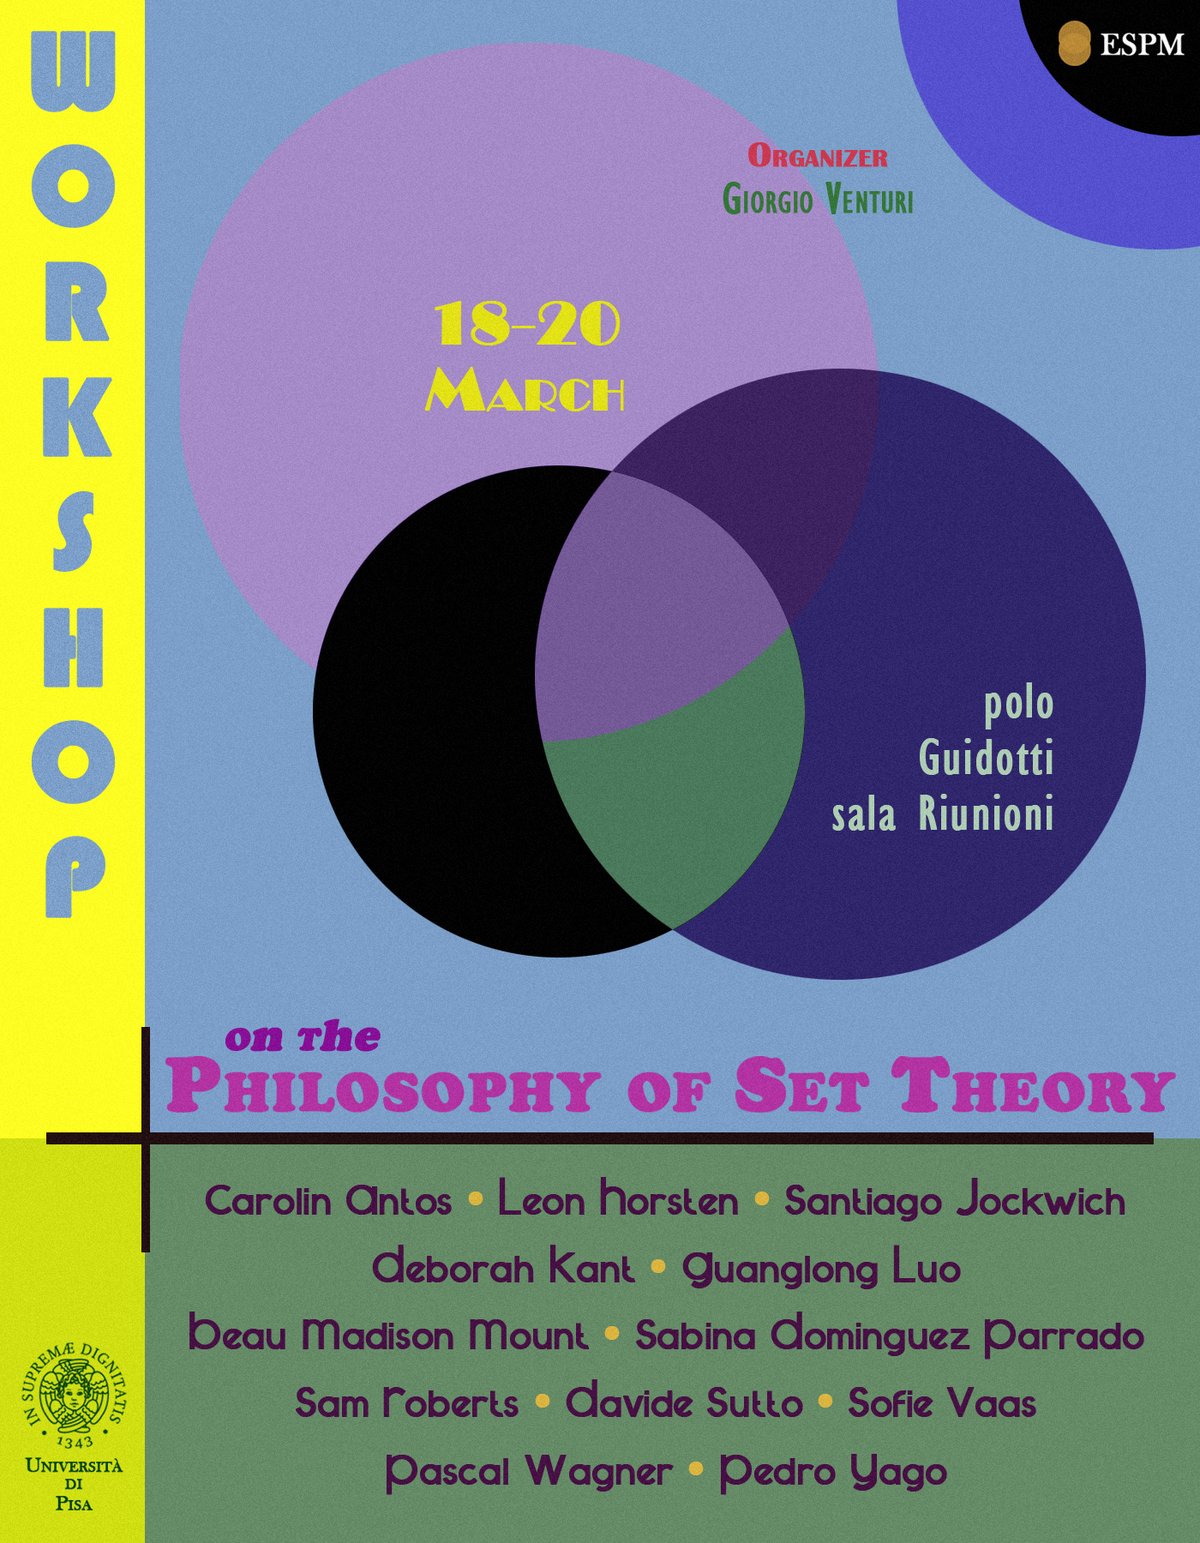 poster for Pisa Set Theory Workshop 